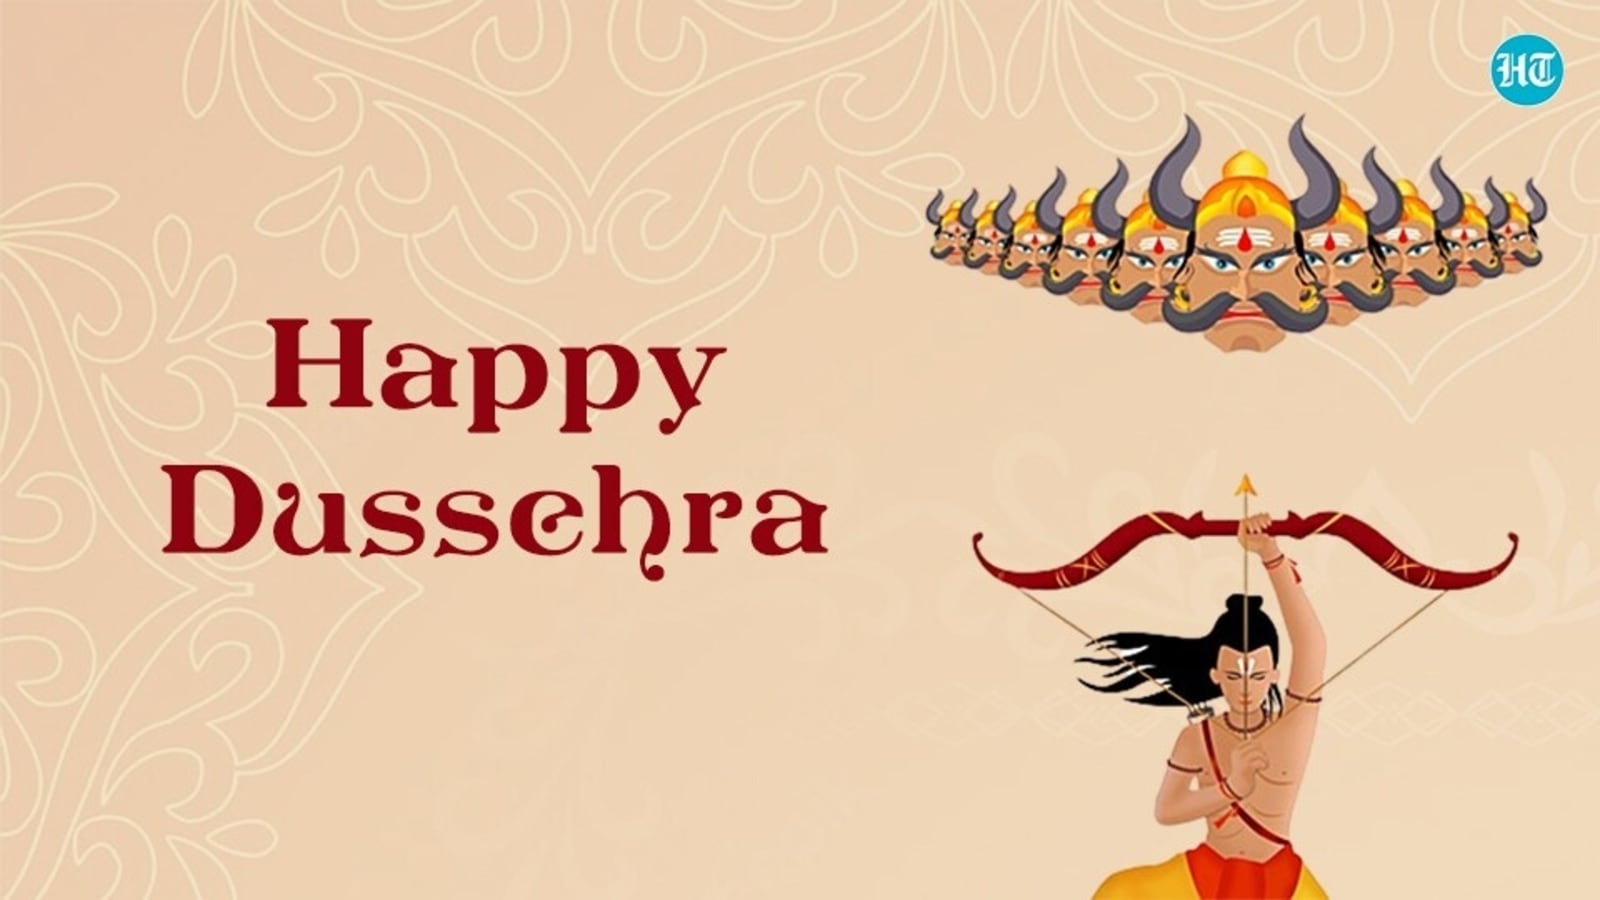 Template banner of happy dussehra festival